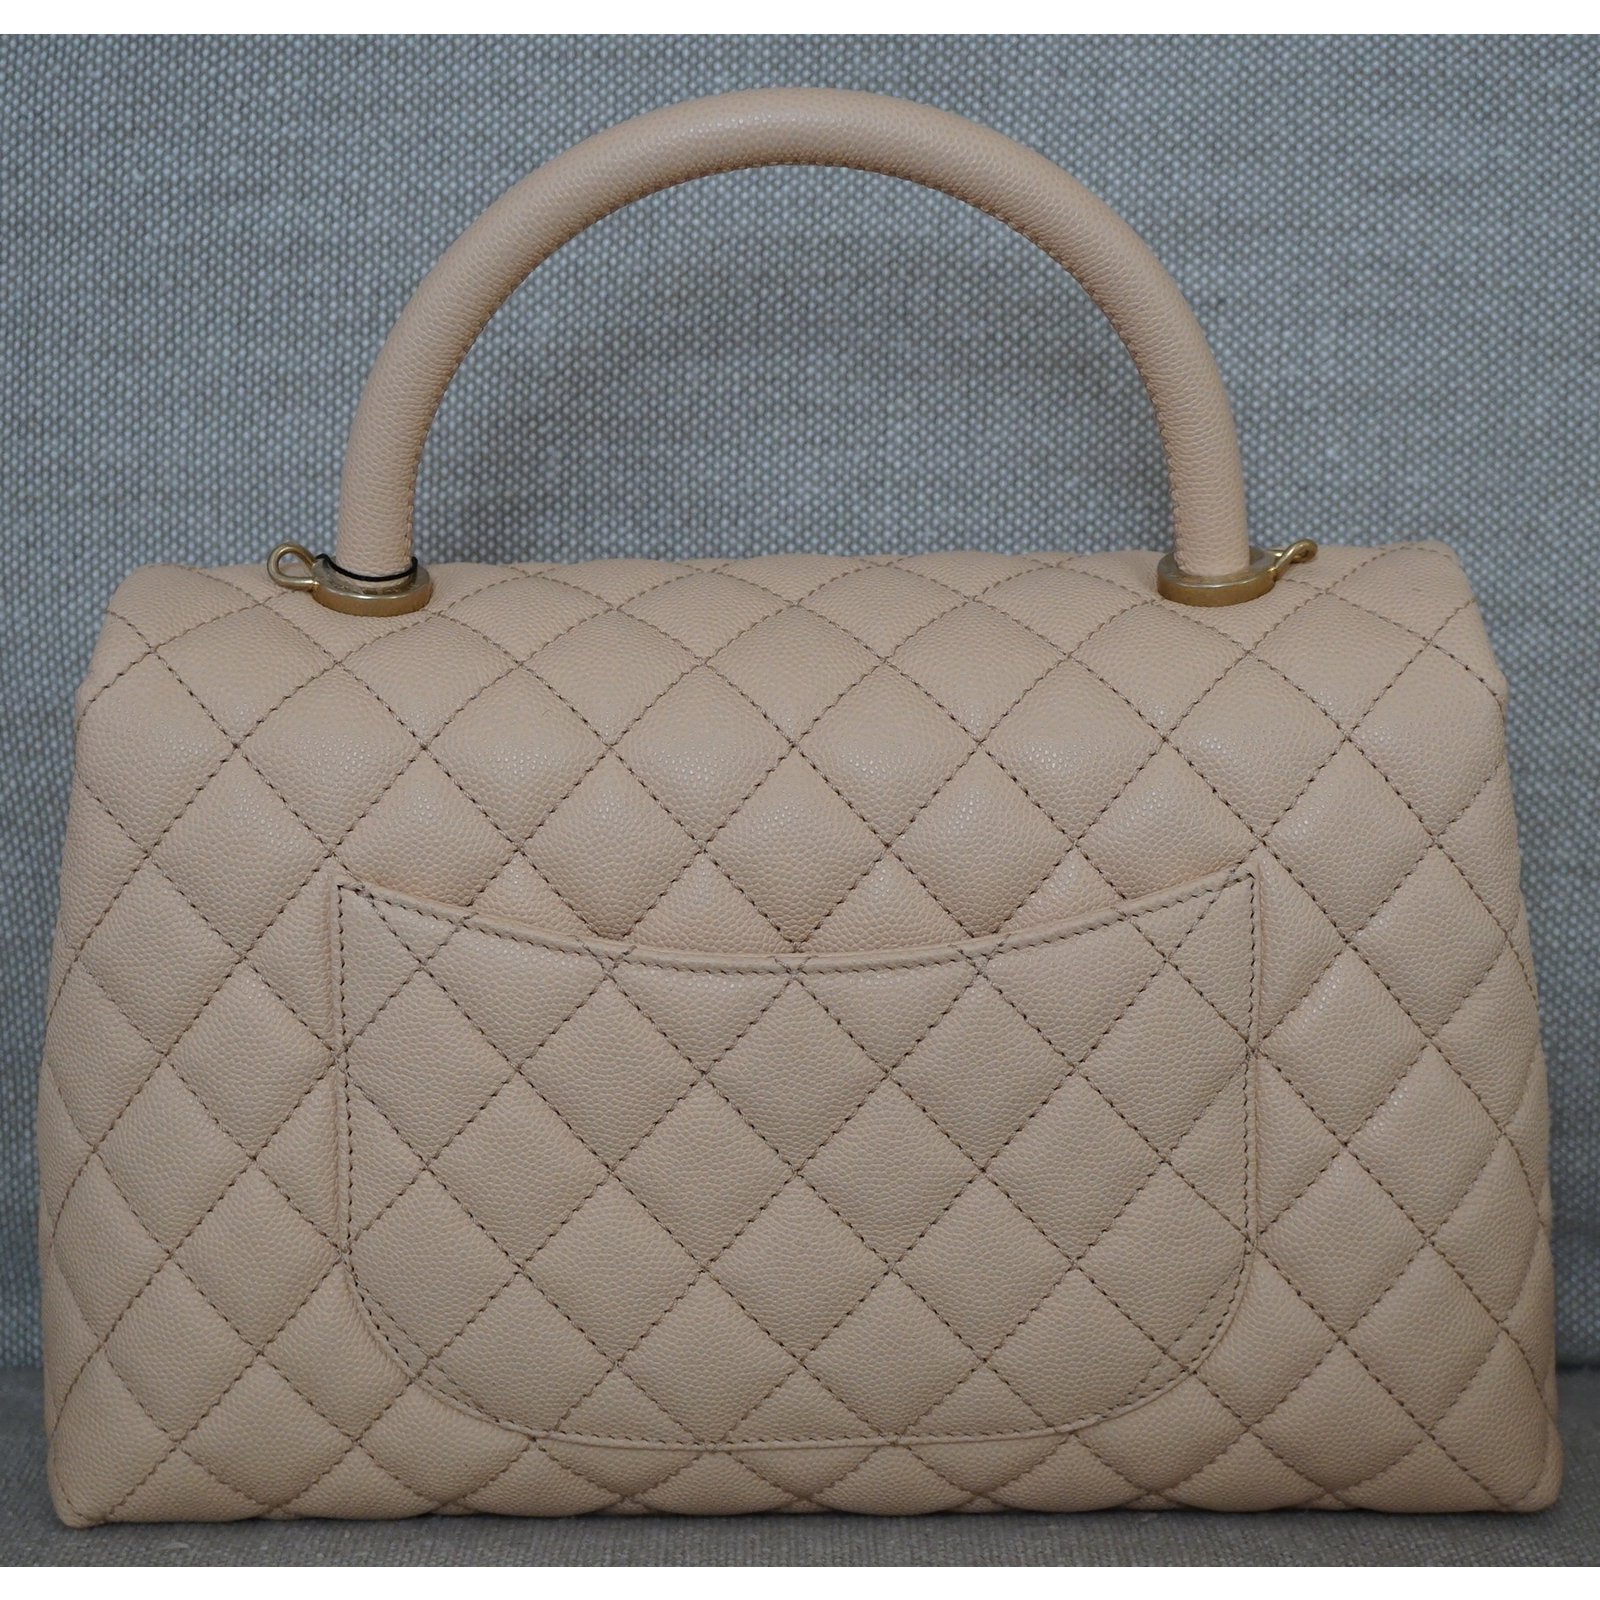 Coco handle leather handbag Chanel Beige in Leather - 17675160